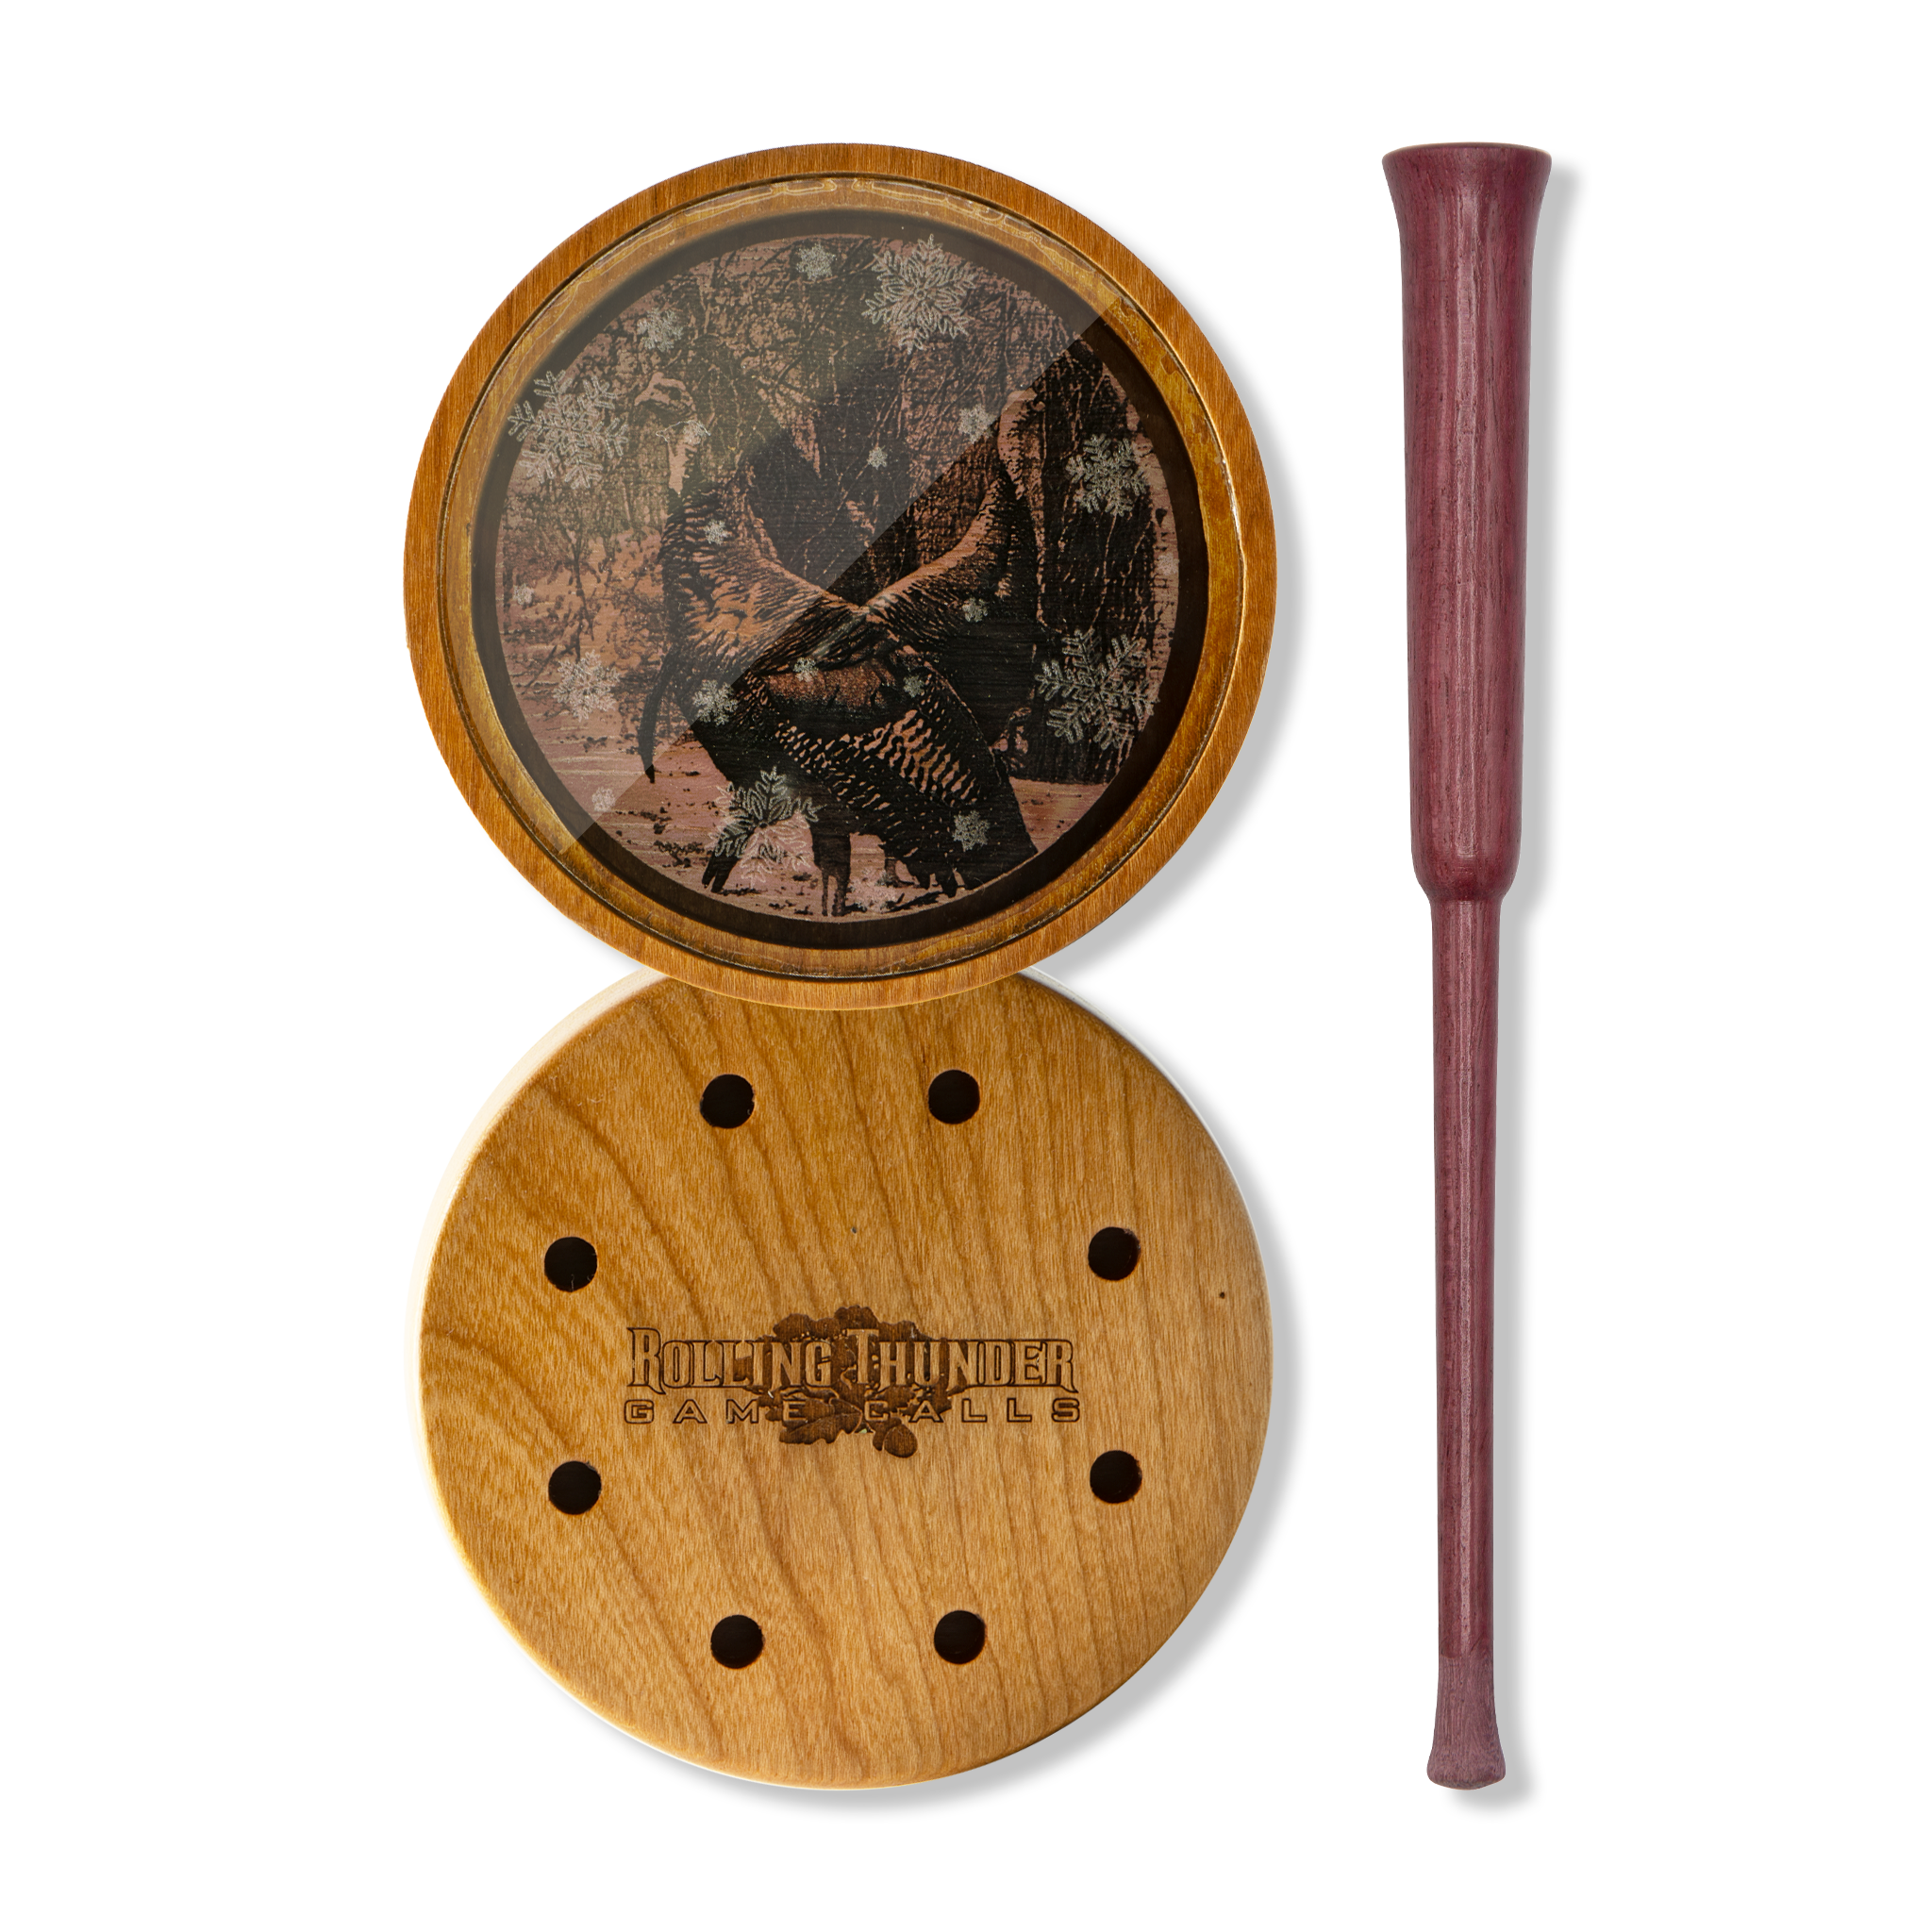 Limited Edition Pot Call with Purpleheart Striker